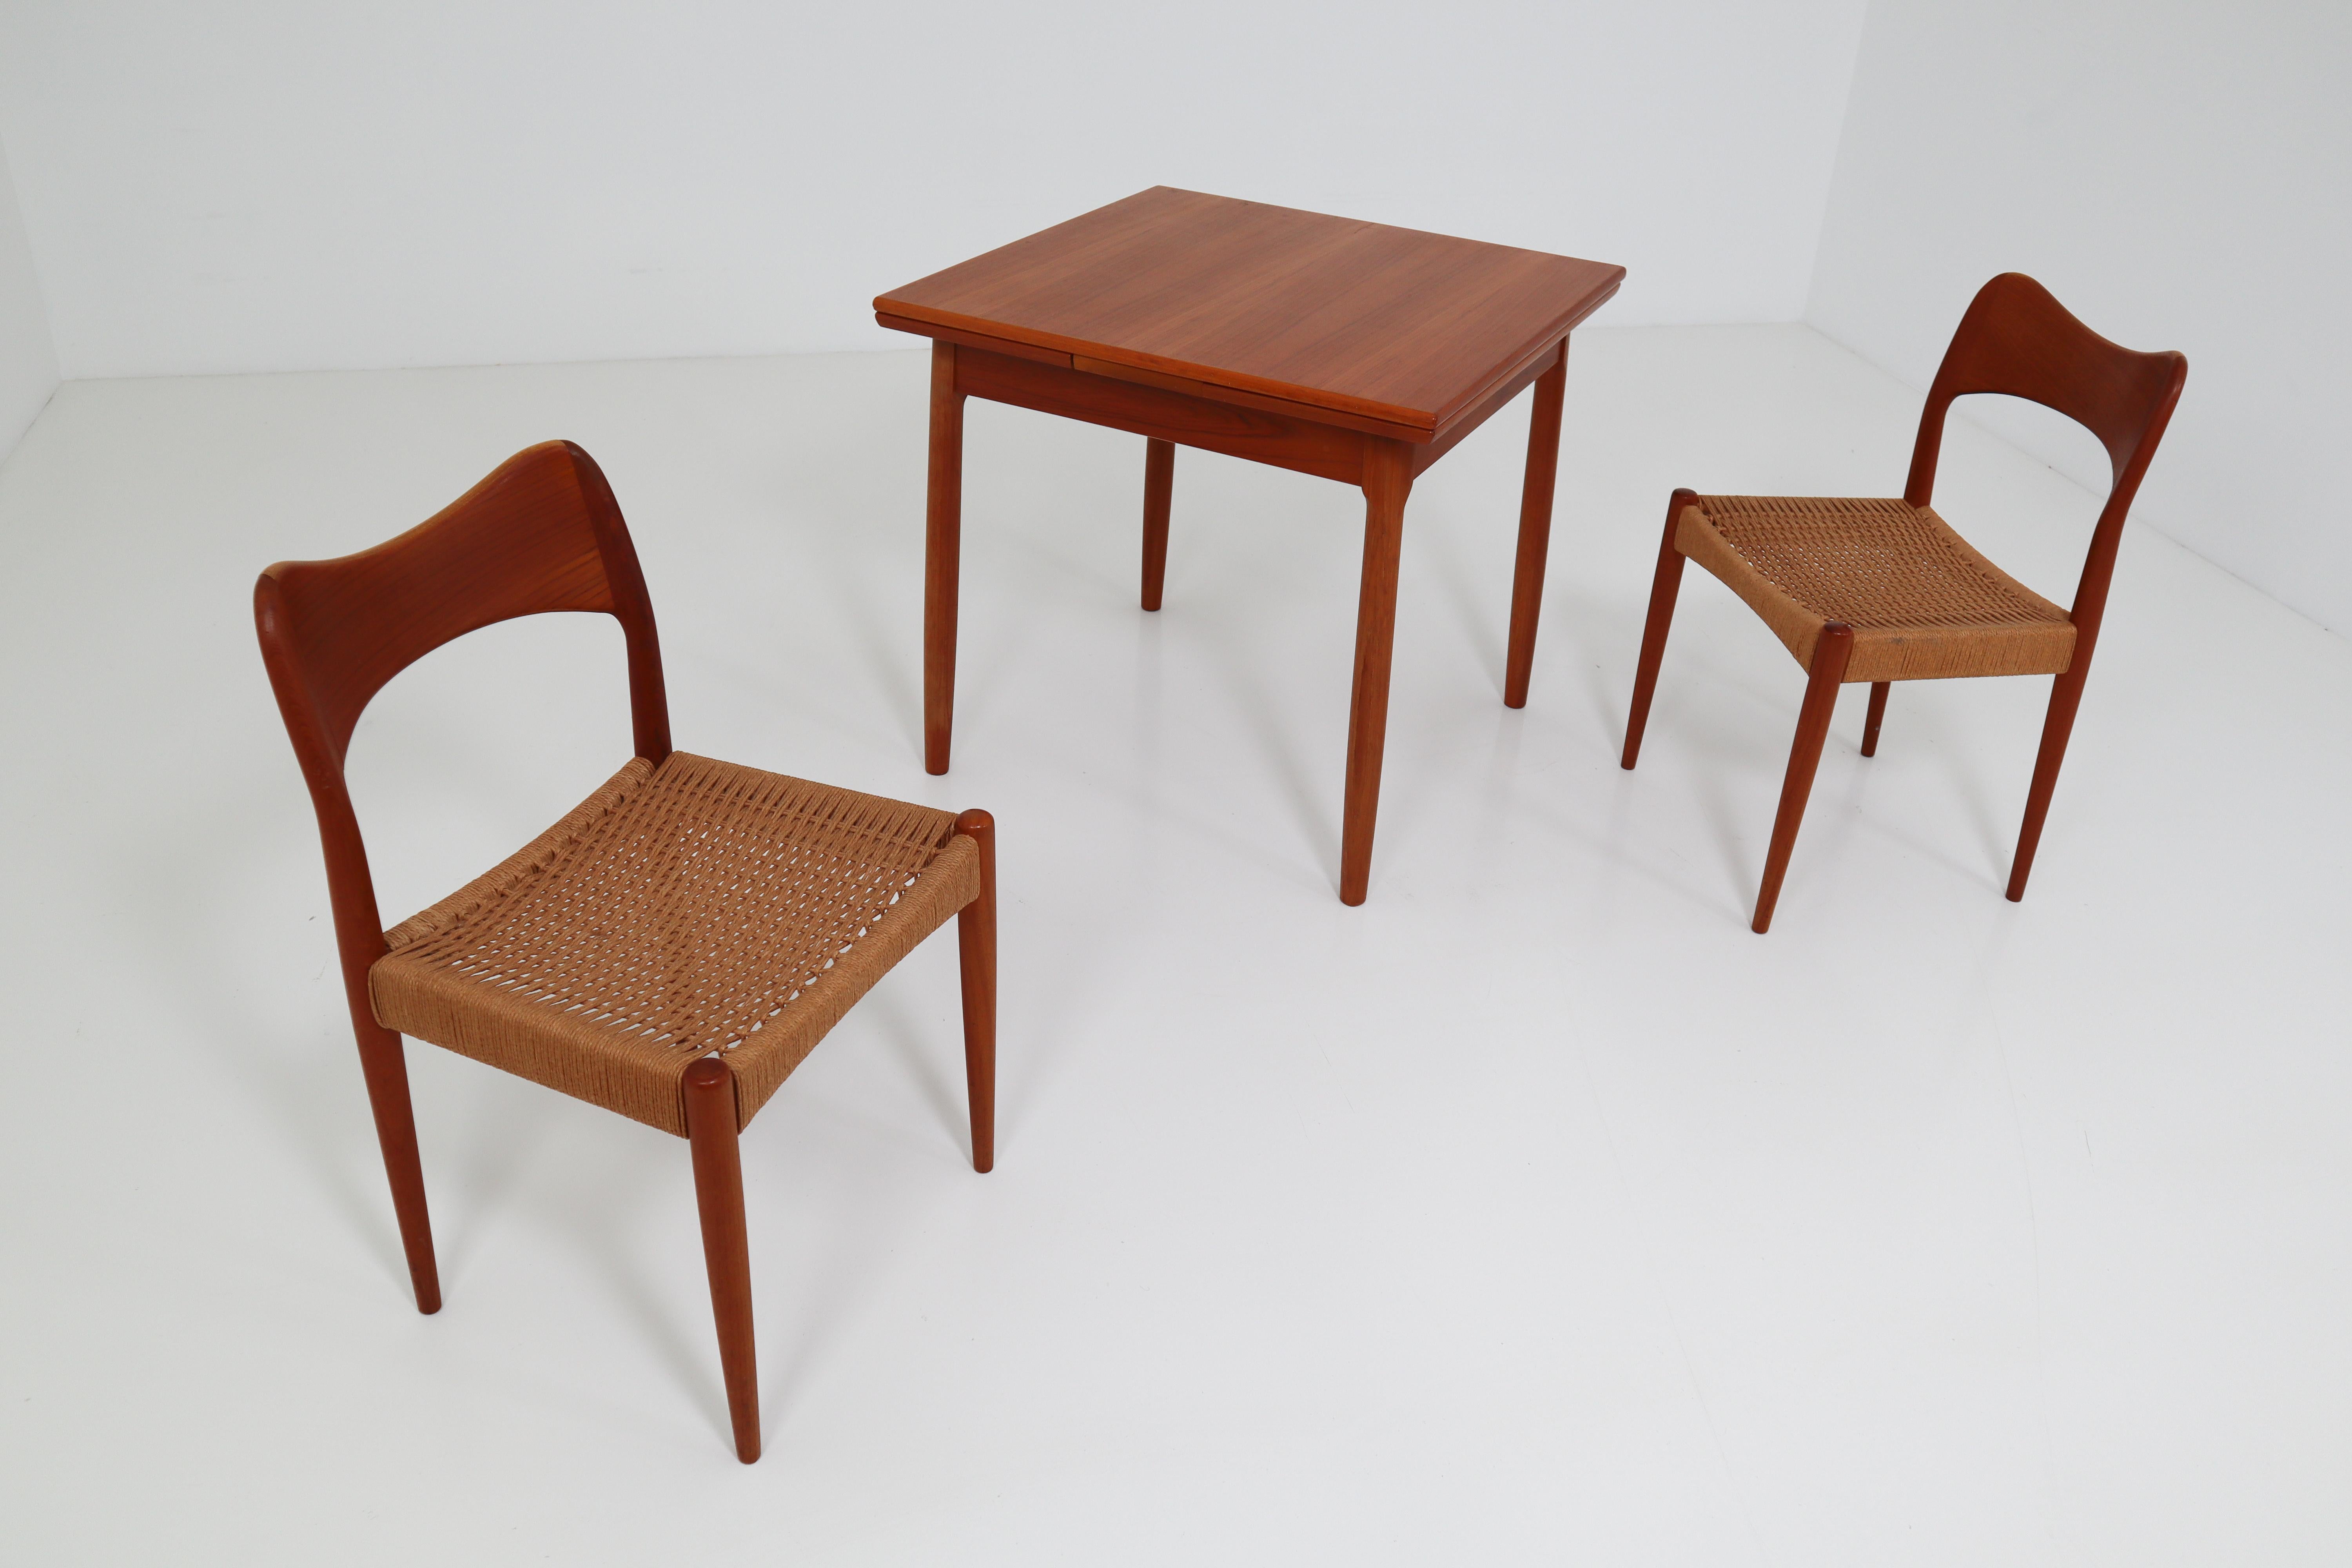 Designed in 1951 by Niels Otto Møller for J. L. Møllers Møbelfabrik, these Classic Danish dining chairs, model 71, feature graceful teak frames and handwoven papercord seats. Small model 12 teak dining table by Niels O. Møller. Excellent condition.